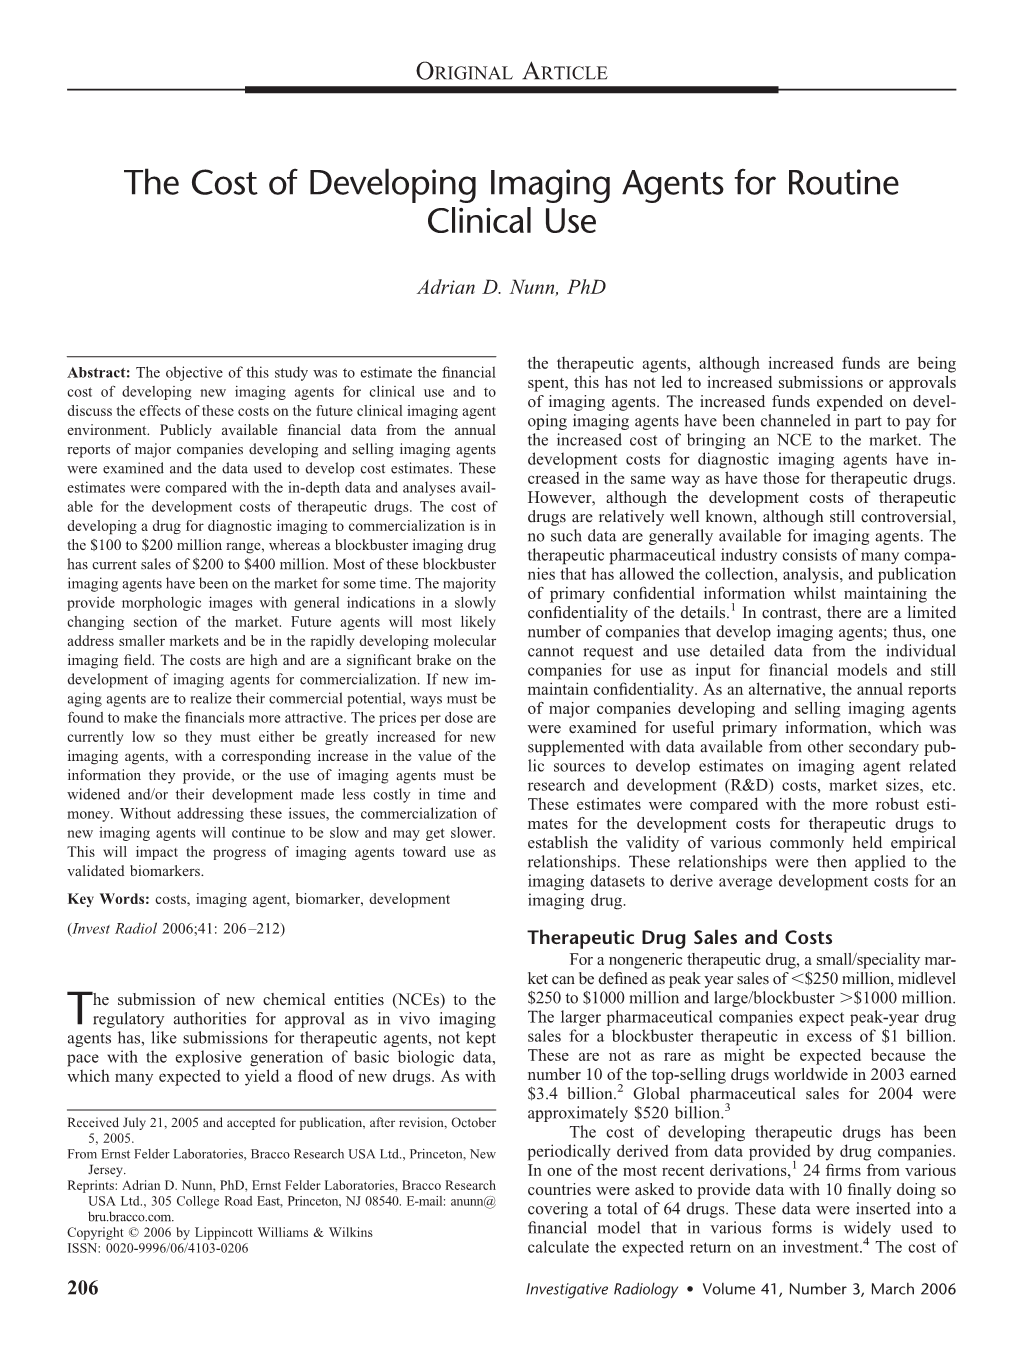 The Cost of Developing Imaging Agents for Routine Clinical Use